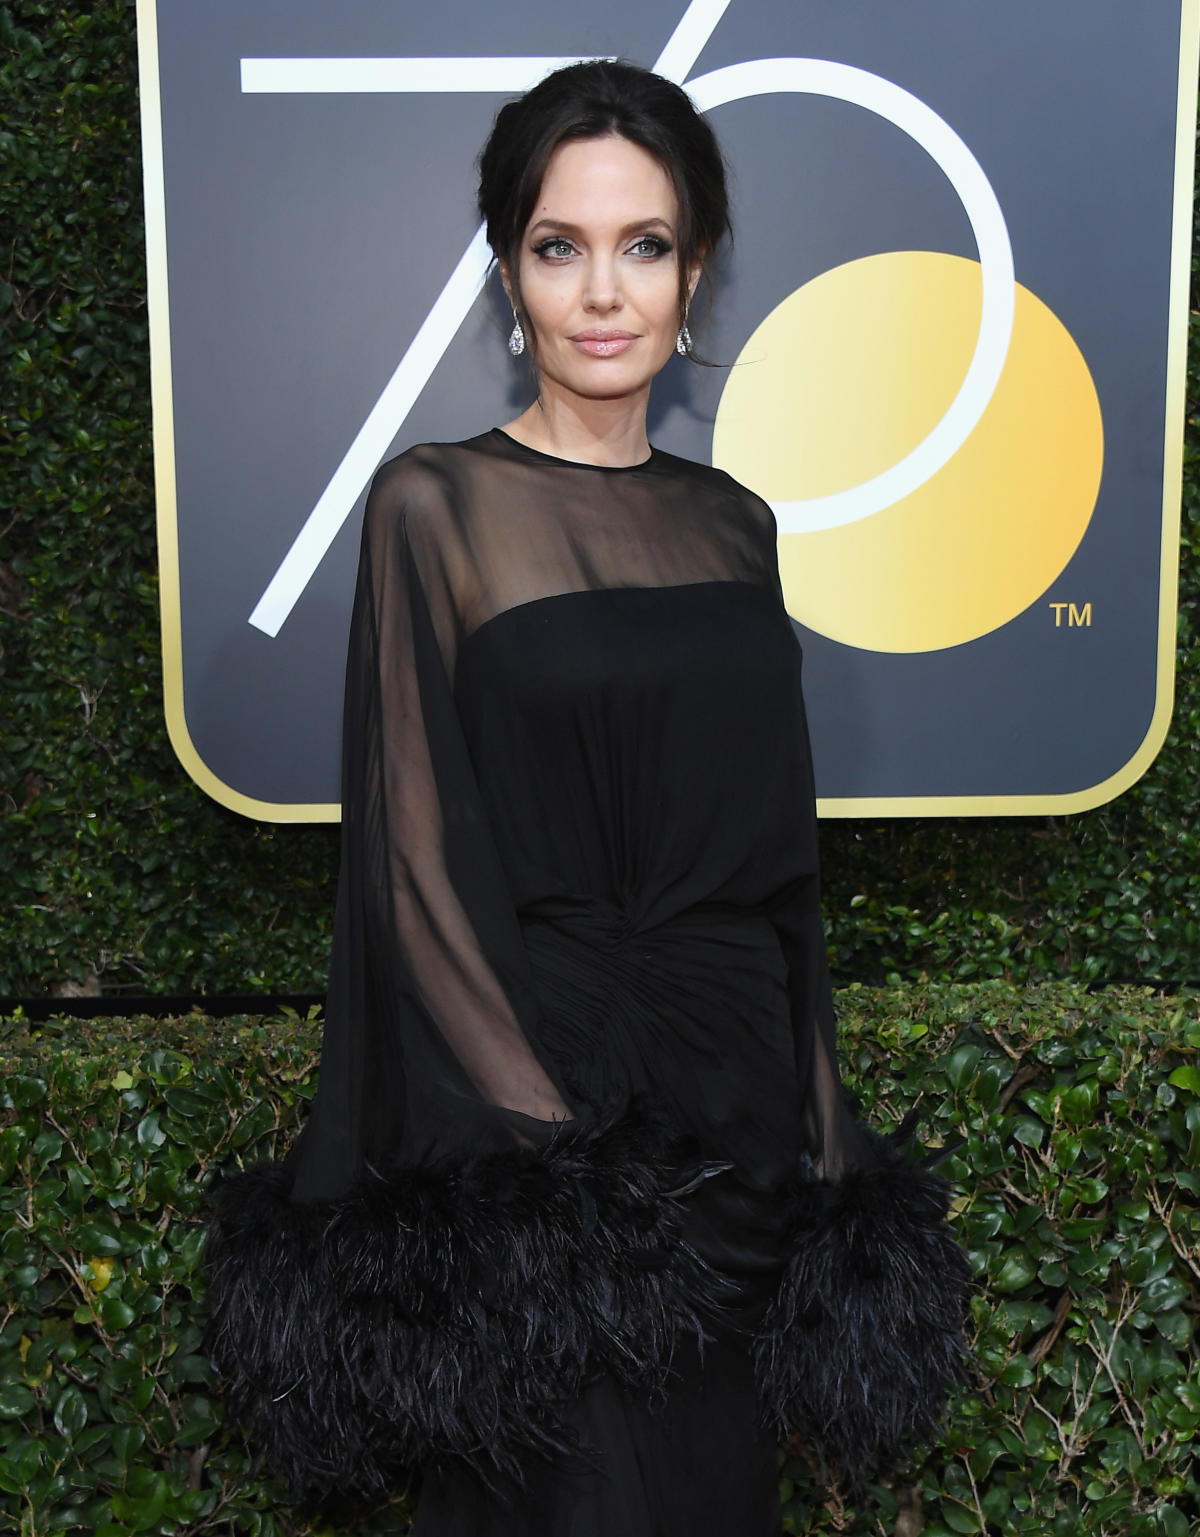 Angelina Jolie In The Knotted Shirt Ahead Of The Golden Globe